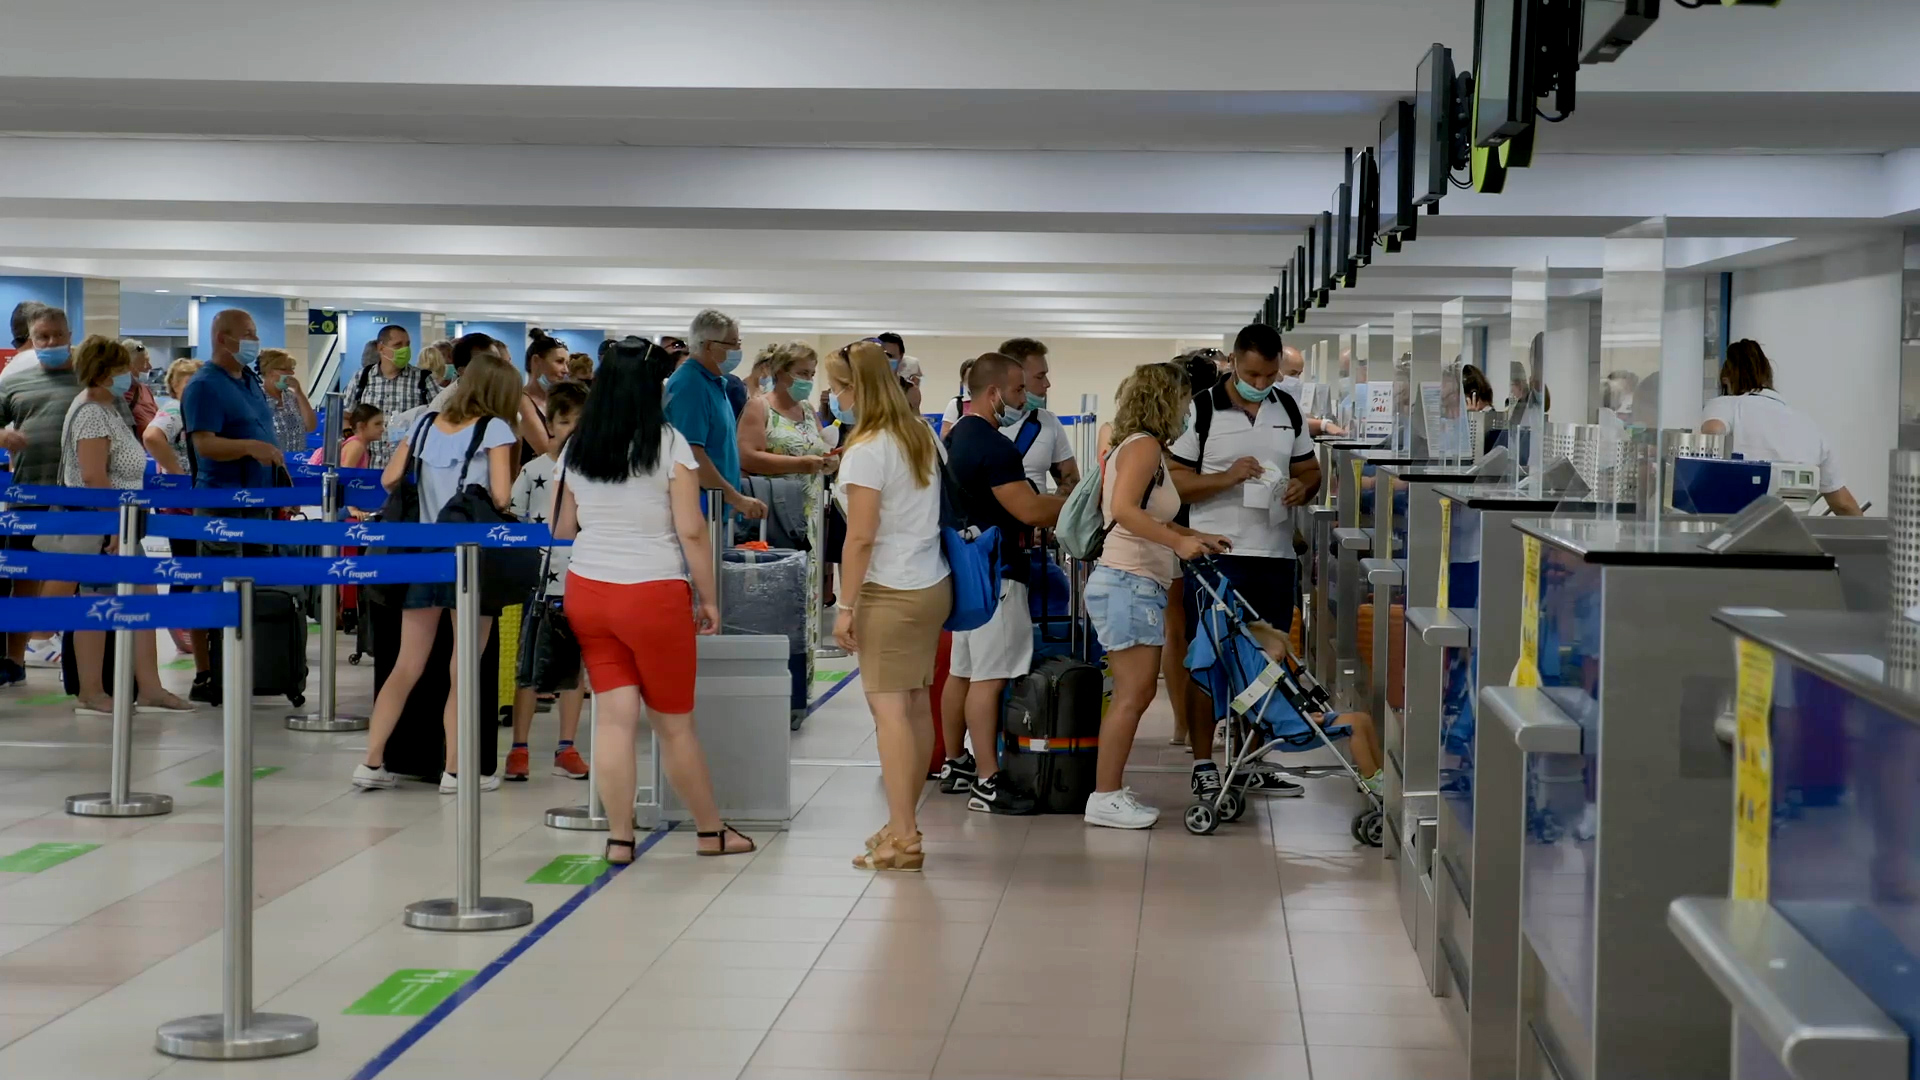 TOURISTS-GR AIRPORT